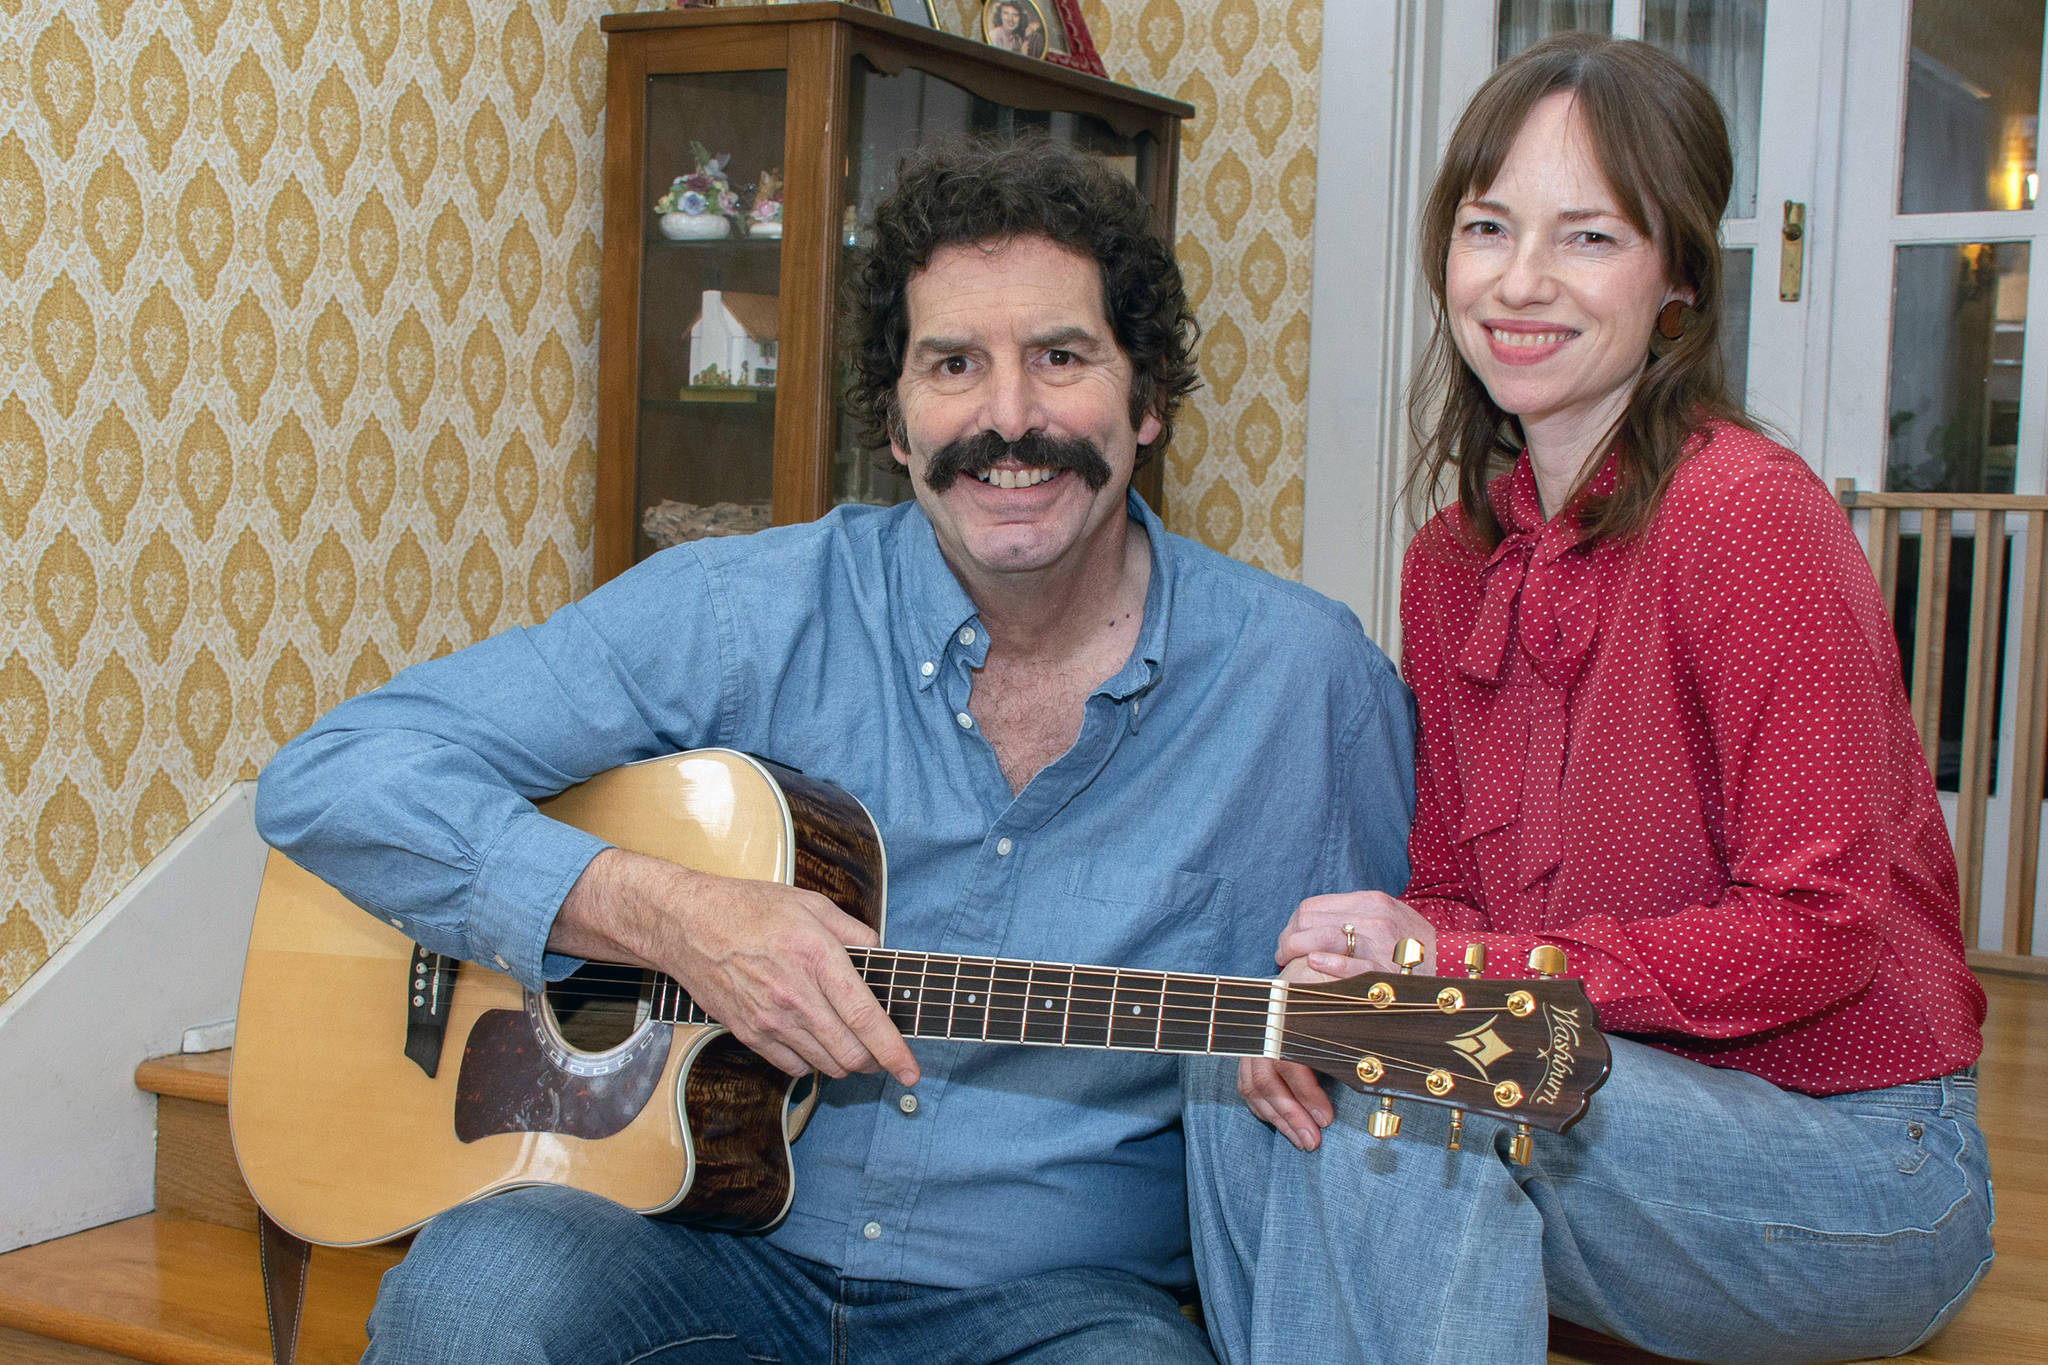 Courtesy Photo | John Clough                                 John Clough (Jim Croce) and Summer Koester (Ingrid Croce) will star as the folk-singing couple at the center of an upcoming original production.